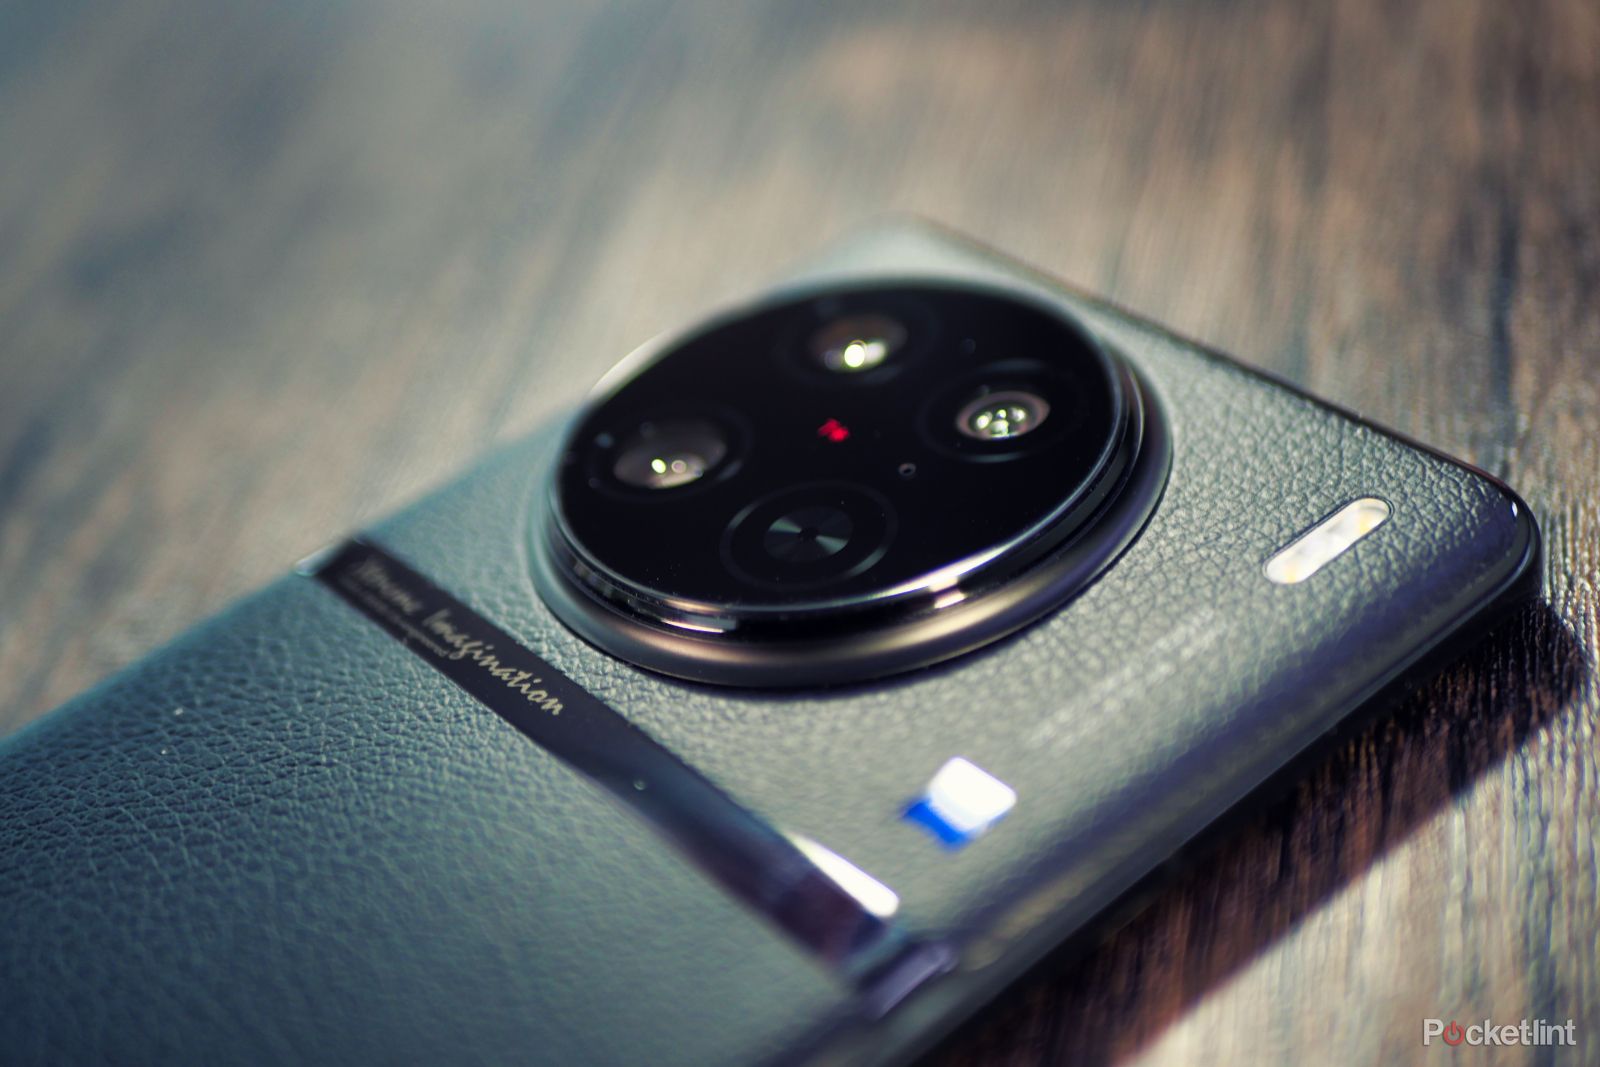 The killer smartphone camera feature that we all want, but may never get